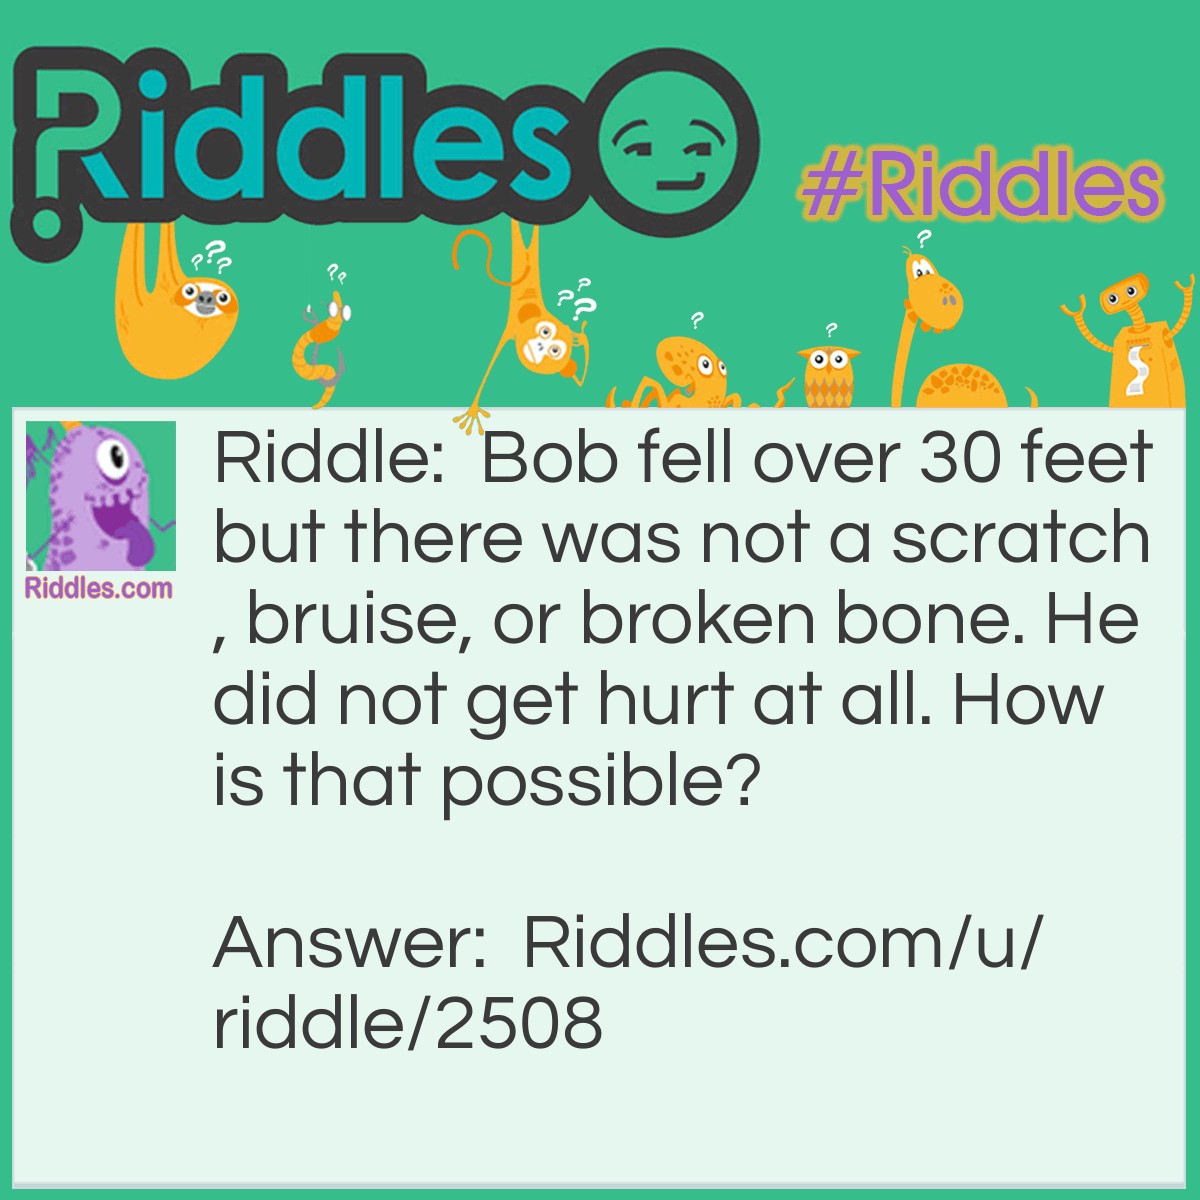 Riddle: Bob fell over 30 feet but there was not a scratch, bruise, or broken bone. He did not get hurt at all. How is that possible? Answer: He fell over 30 peoples feet at the movie theaters.